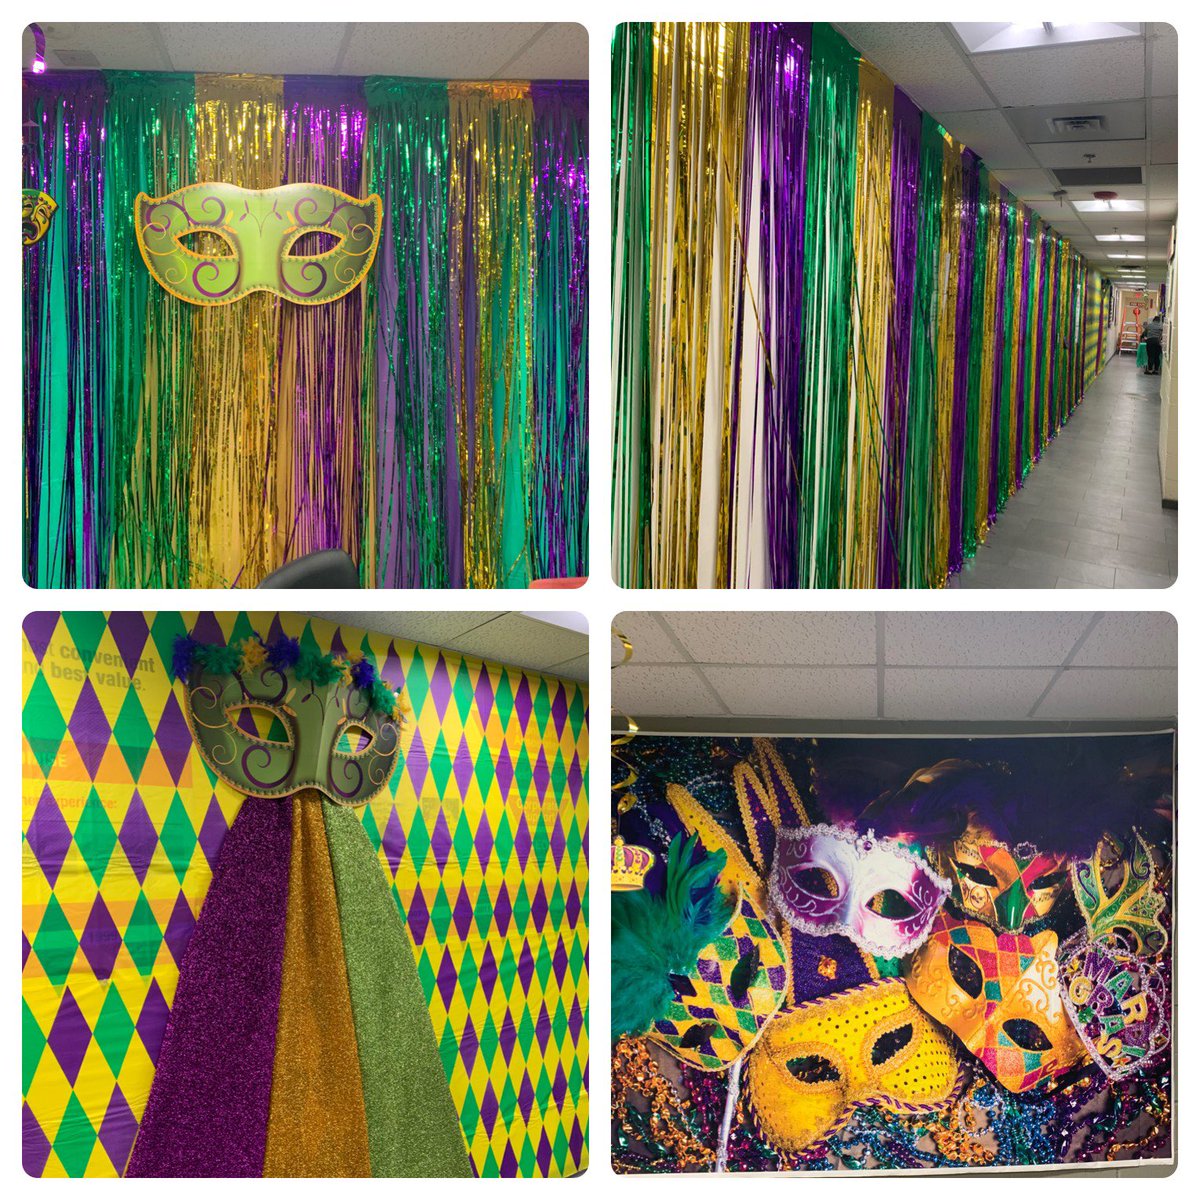 Mask-A-Rade Success Sharing Party decorations has begun and can’t wait to make a Mask-memorable moments with everyone . @MattKeatinghd @Tara_ASM0922 @nelsonr1271 @DHRMgregorio